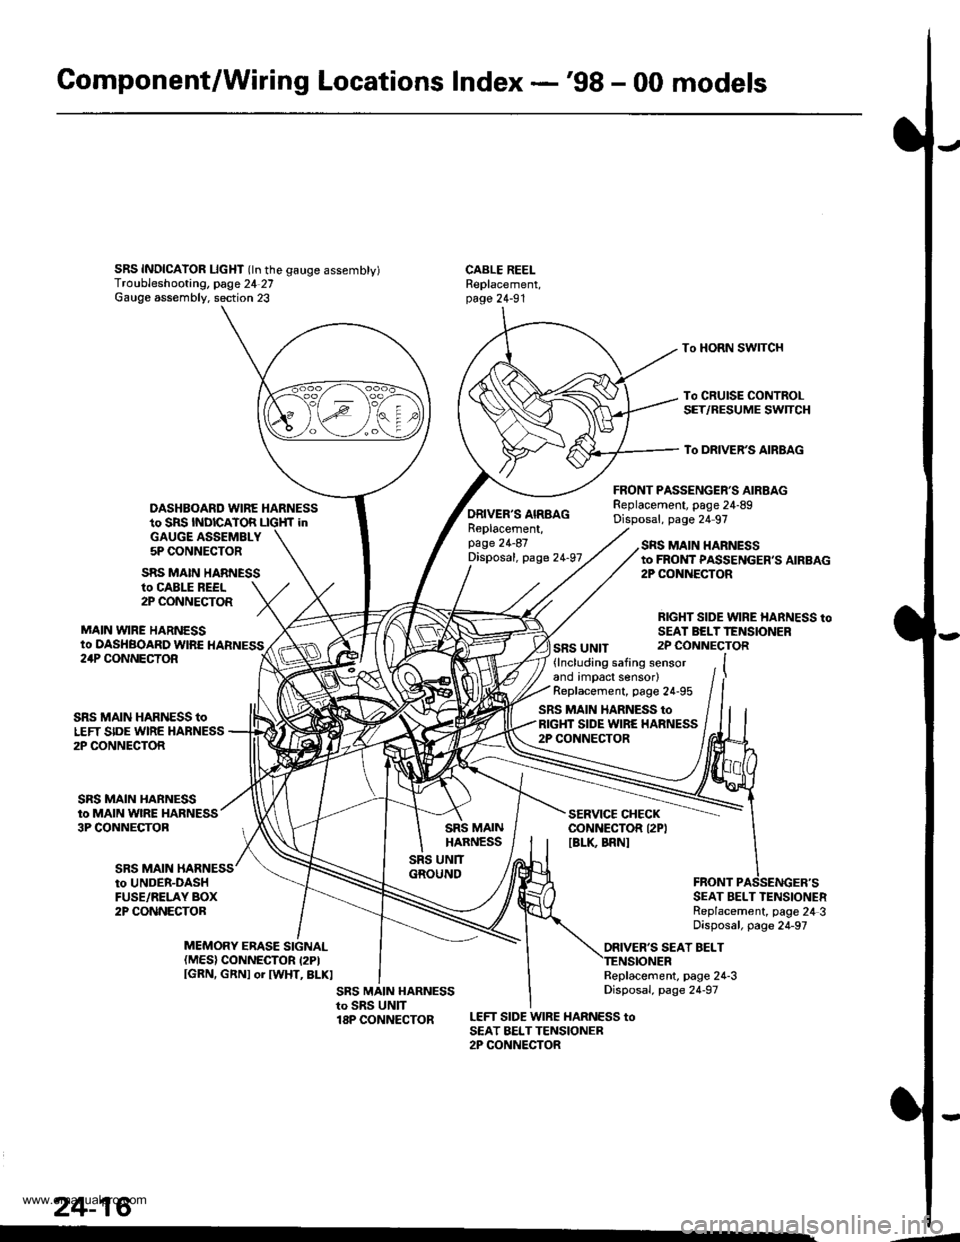 HONDA CR-V 2000 RD1-RD3 / 1.G Workshop Manual 
Gomponent/Wiring Locations Index -98 - 00 models
SRS INDICAIOR LIcHT (ln the gauge assembty)Troubleshooting, page 24 27Gauge assembly. section 23
DASHBOARD WIRE HARNESSto SRS INDICATOR LIGHf inGAUGE